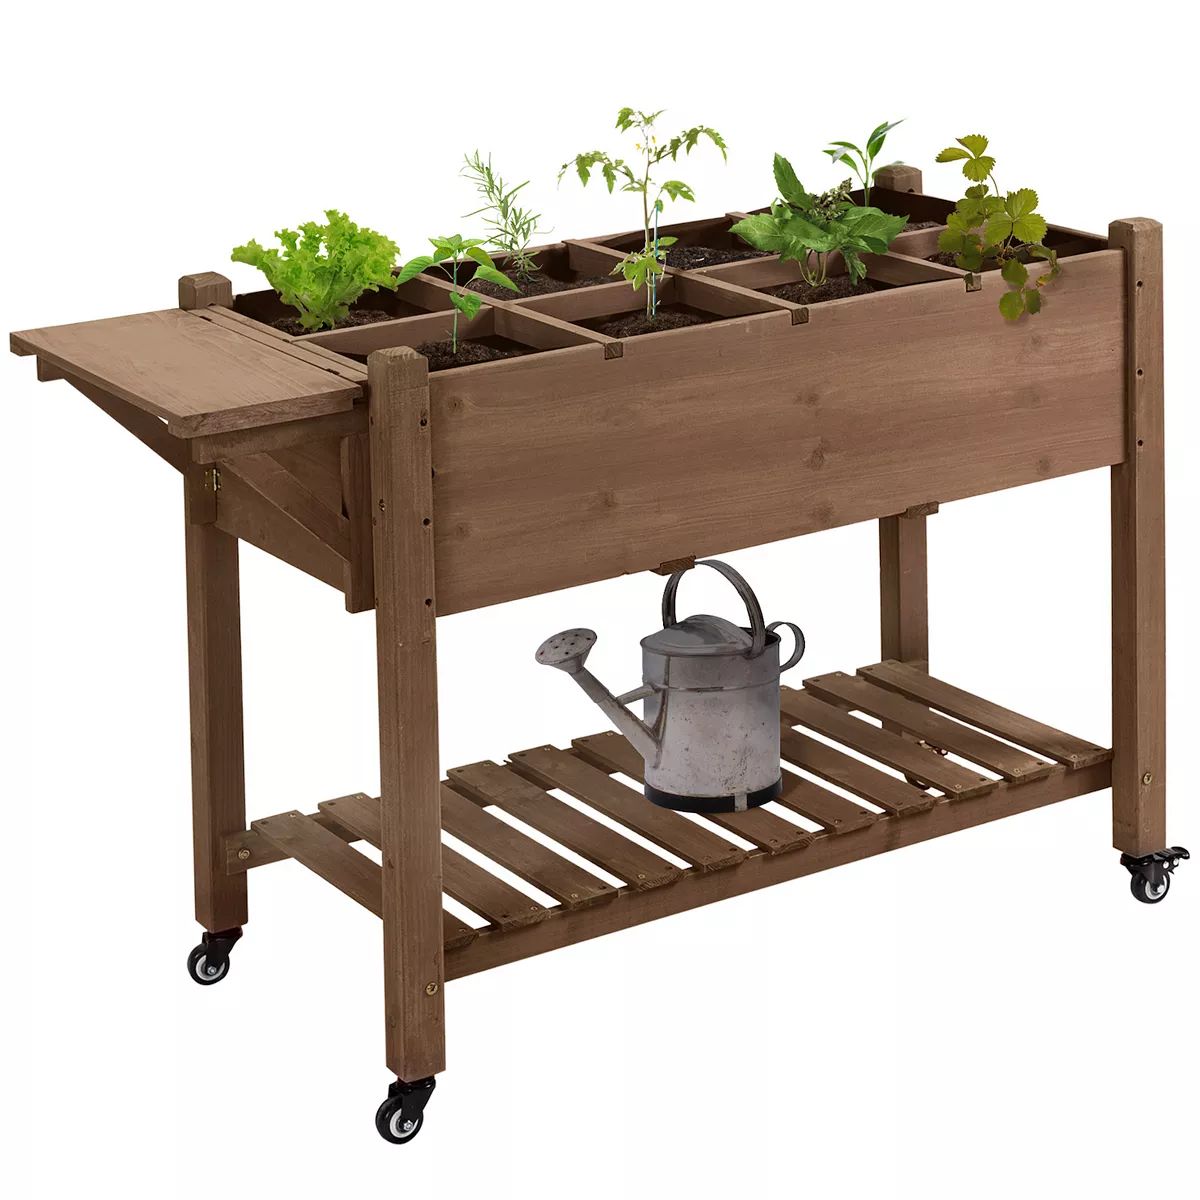 Outsunny 49'' x 21'' x 34'' Raised Garden Bed w/ 8 Grow Grids Outdoor Wood Plant Stand w/ Storage... | Kohl's